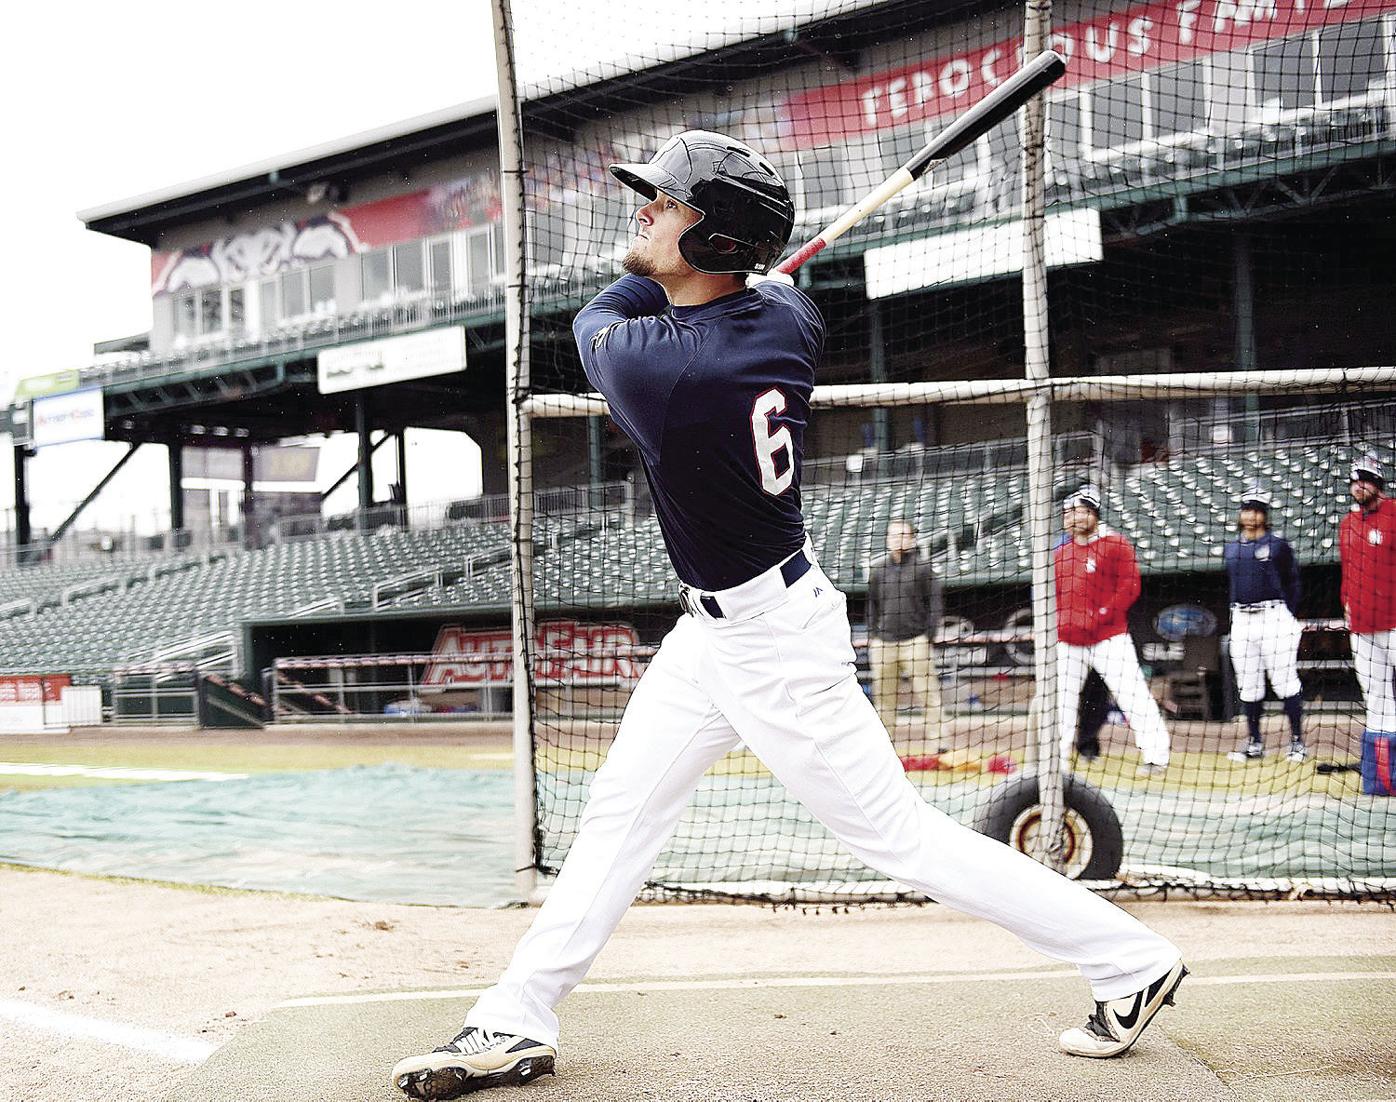 On a team with big names, Biggio finds swing, power, Fisher Cats